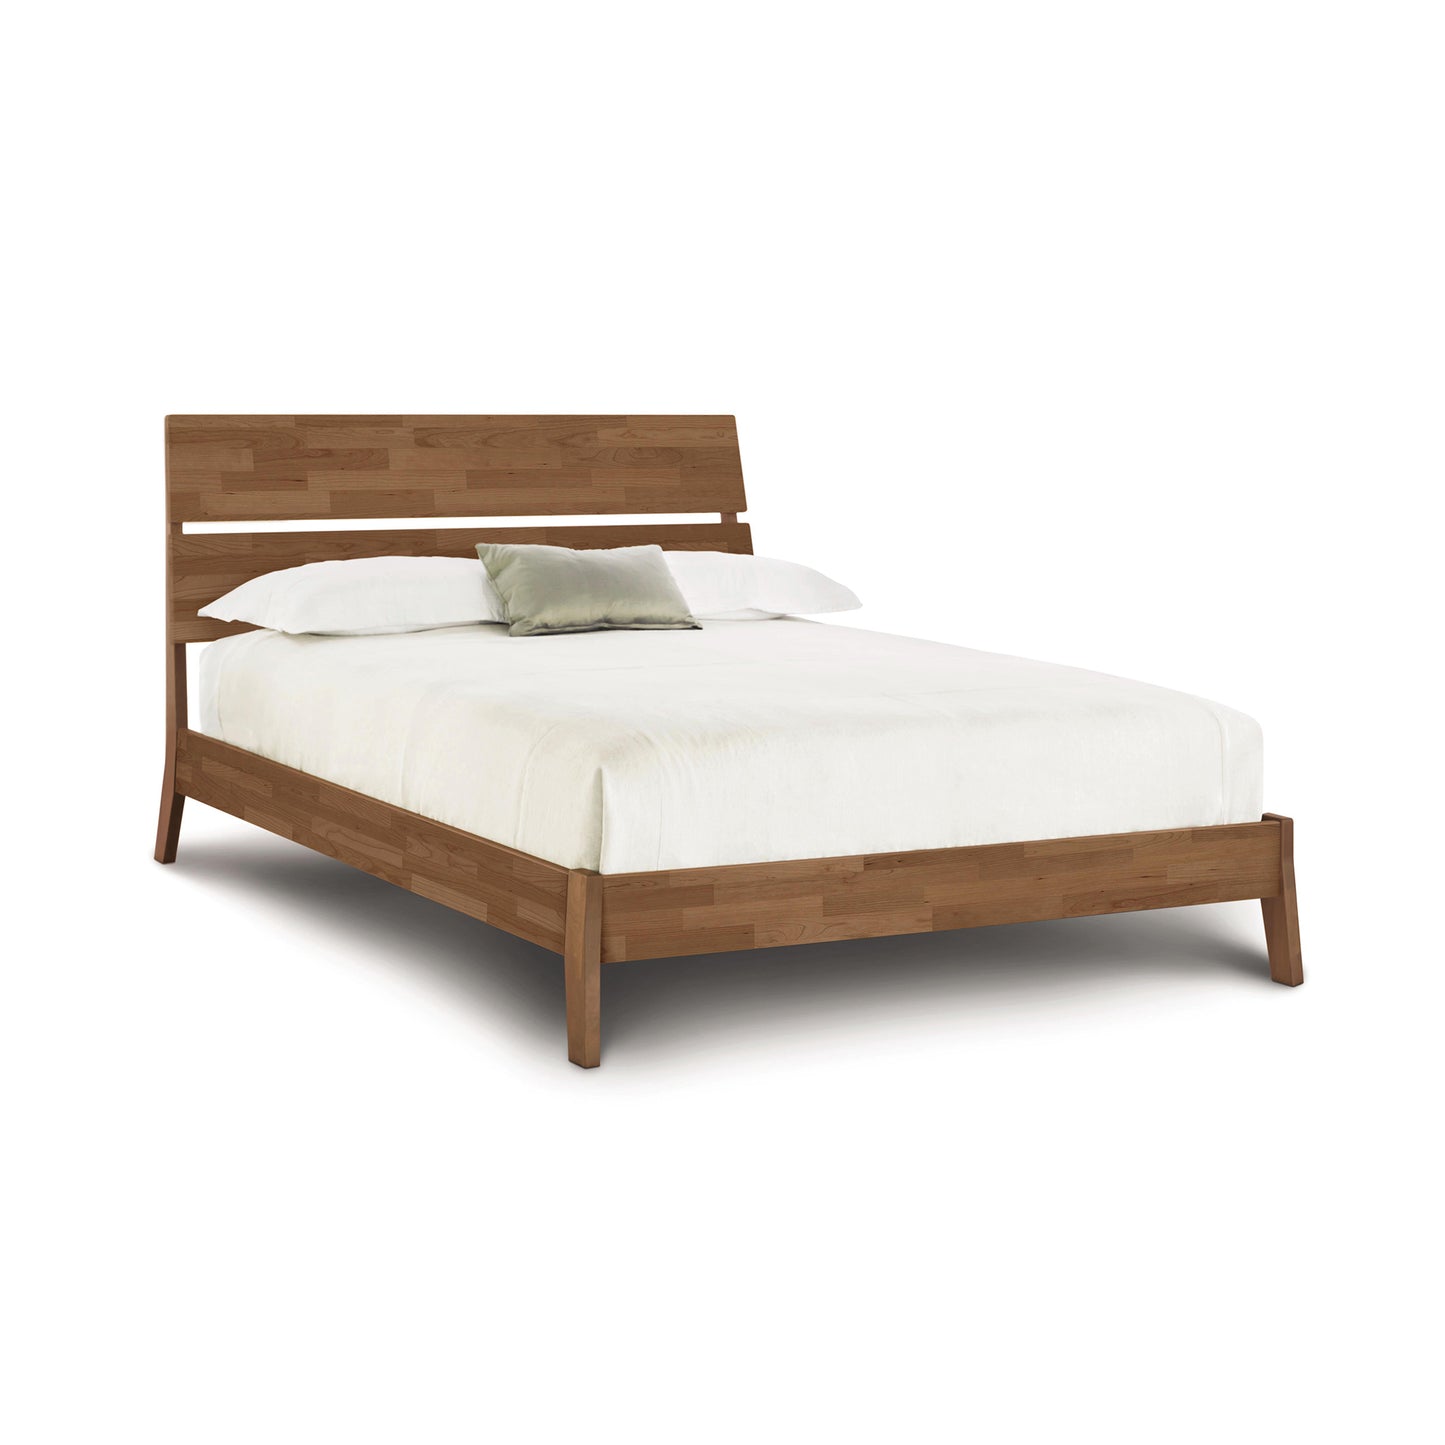 A sustainable Linn Cherry Platform Bed crafted with cherry hardwood, featuring a wooden headboard and footboard, made by Copeland Furniture.